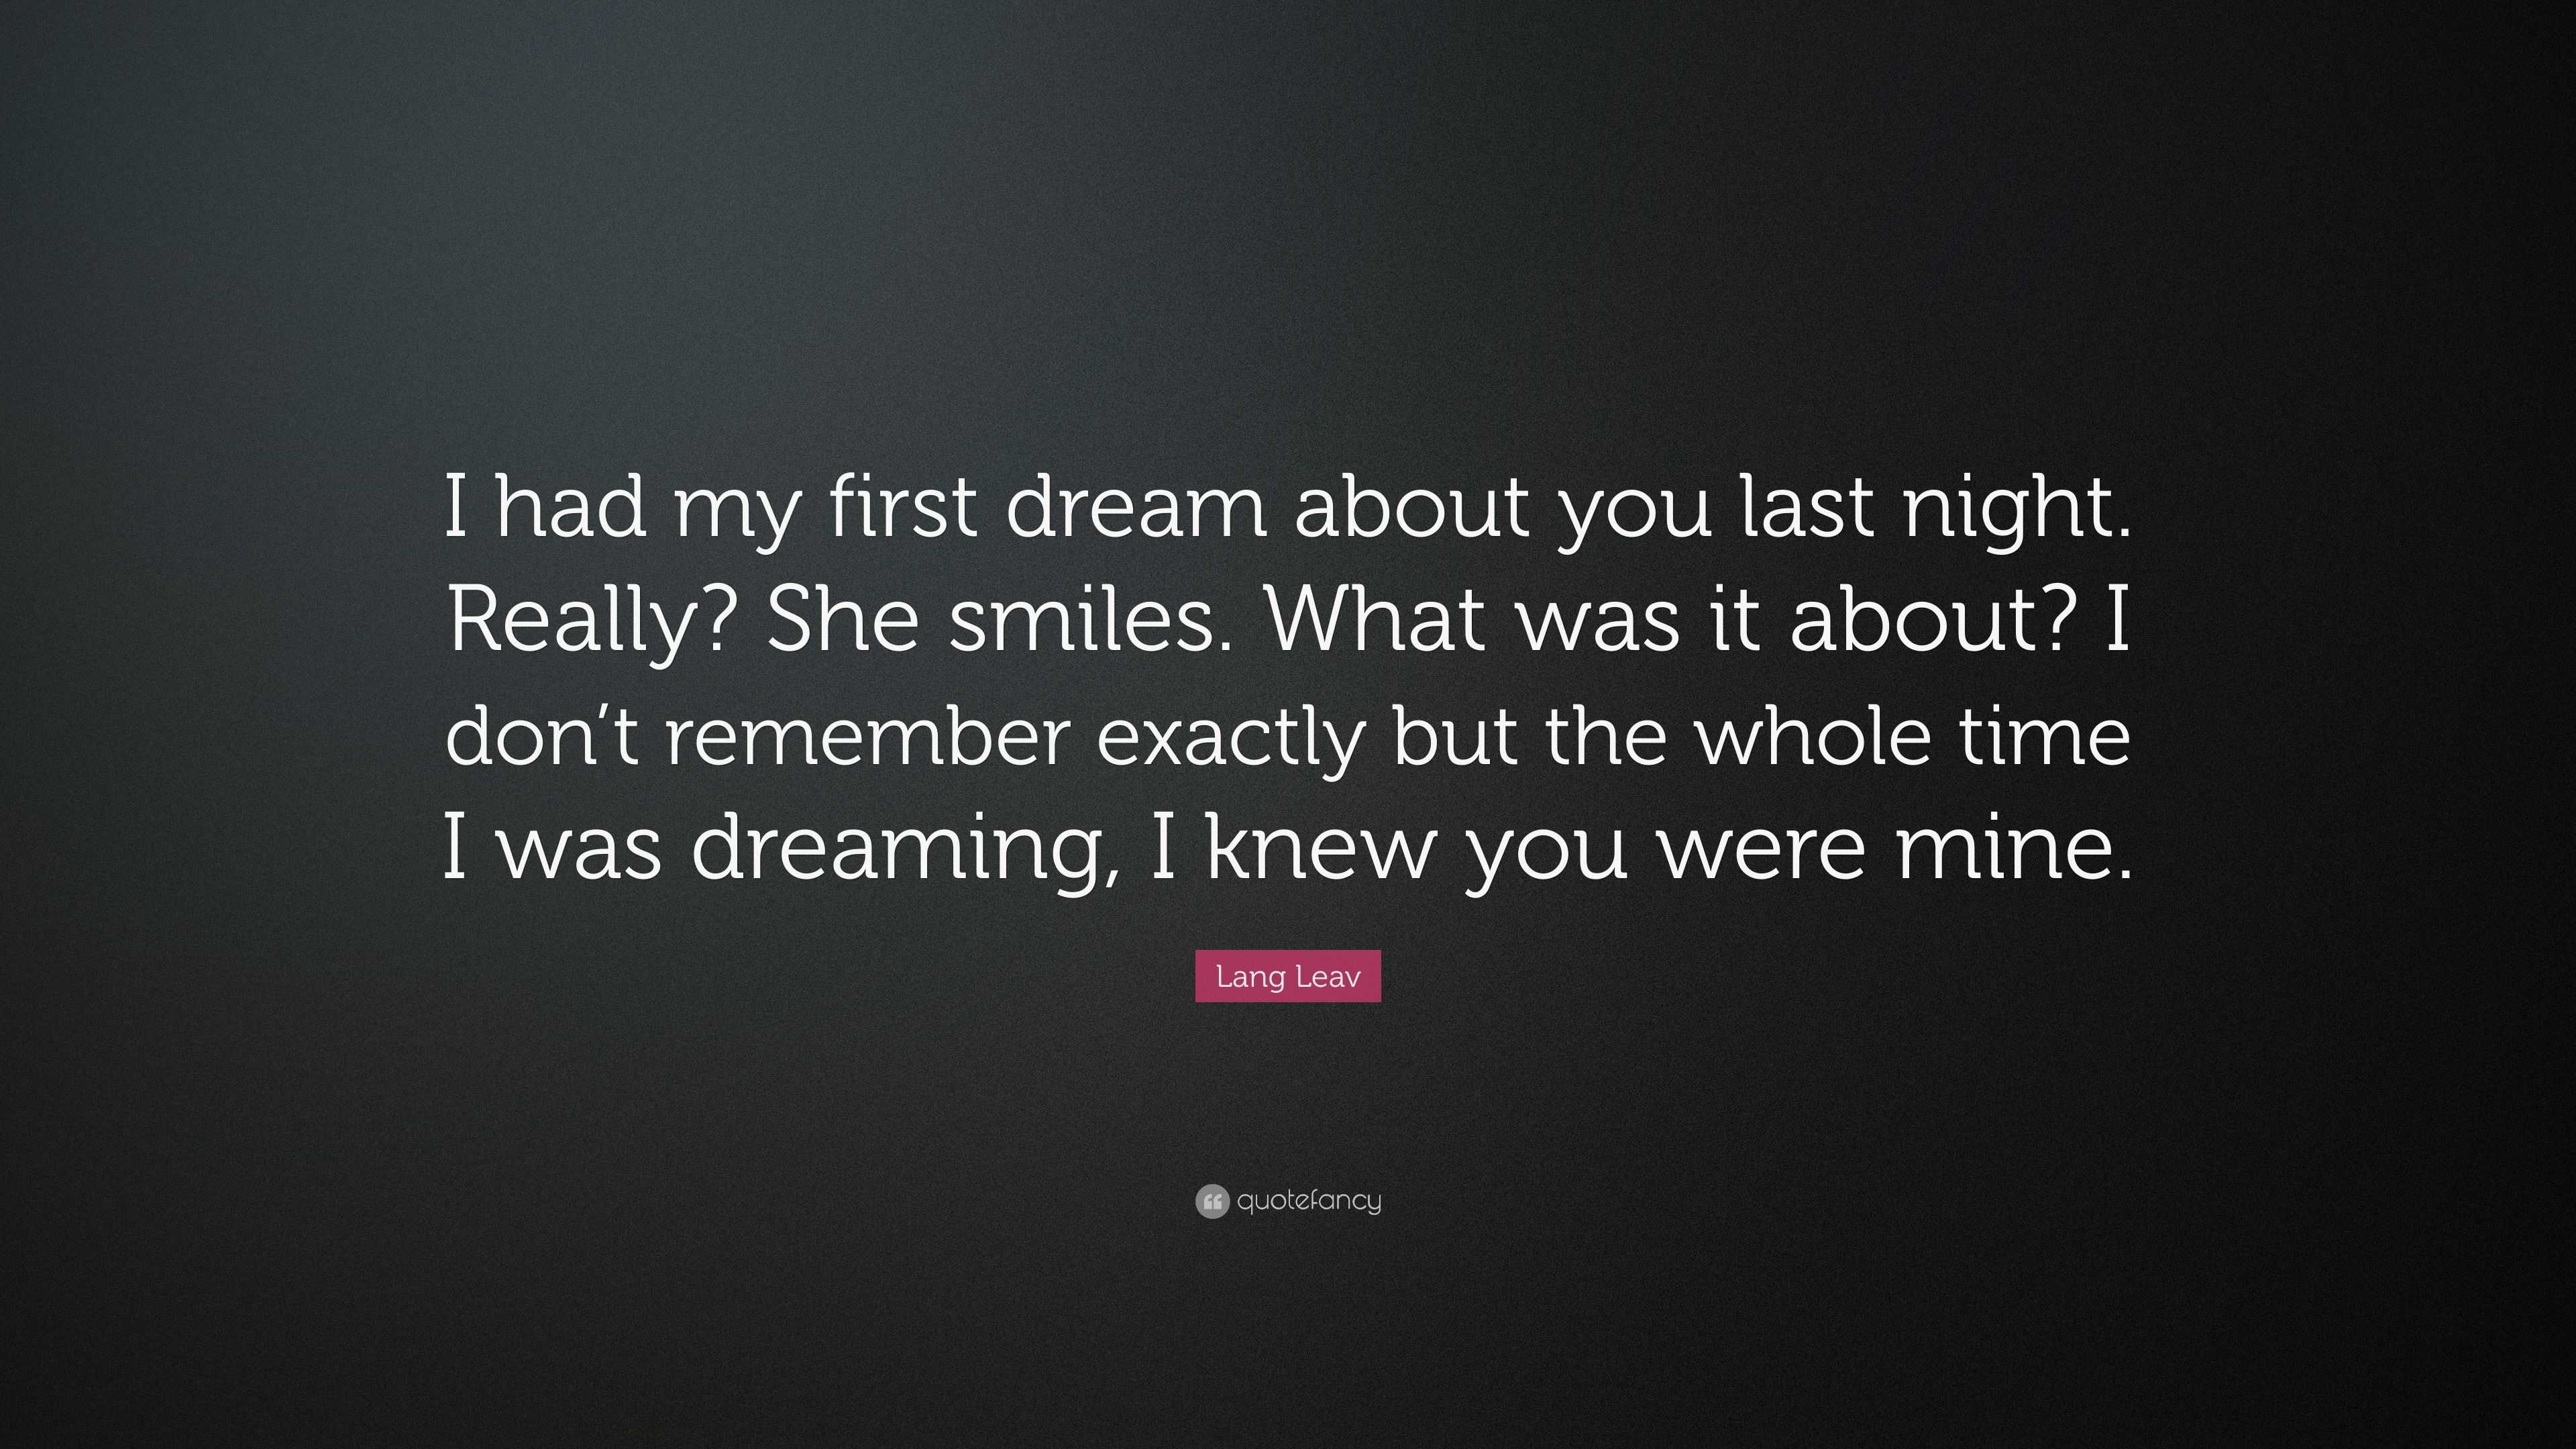 Lang Leav Quote “i Had My First Dream About You Last Night Really